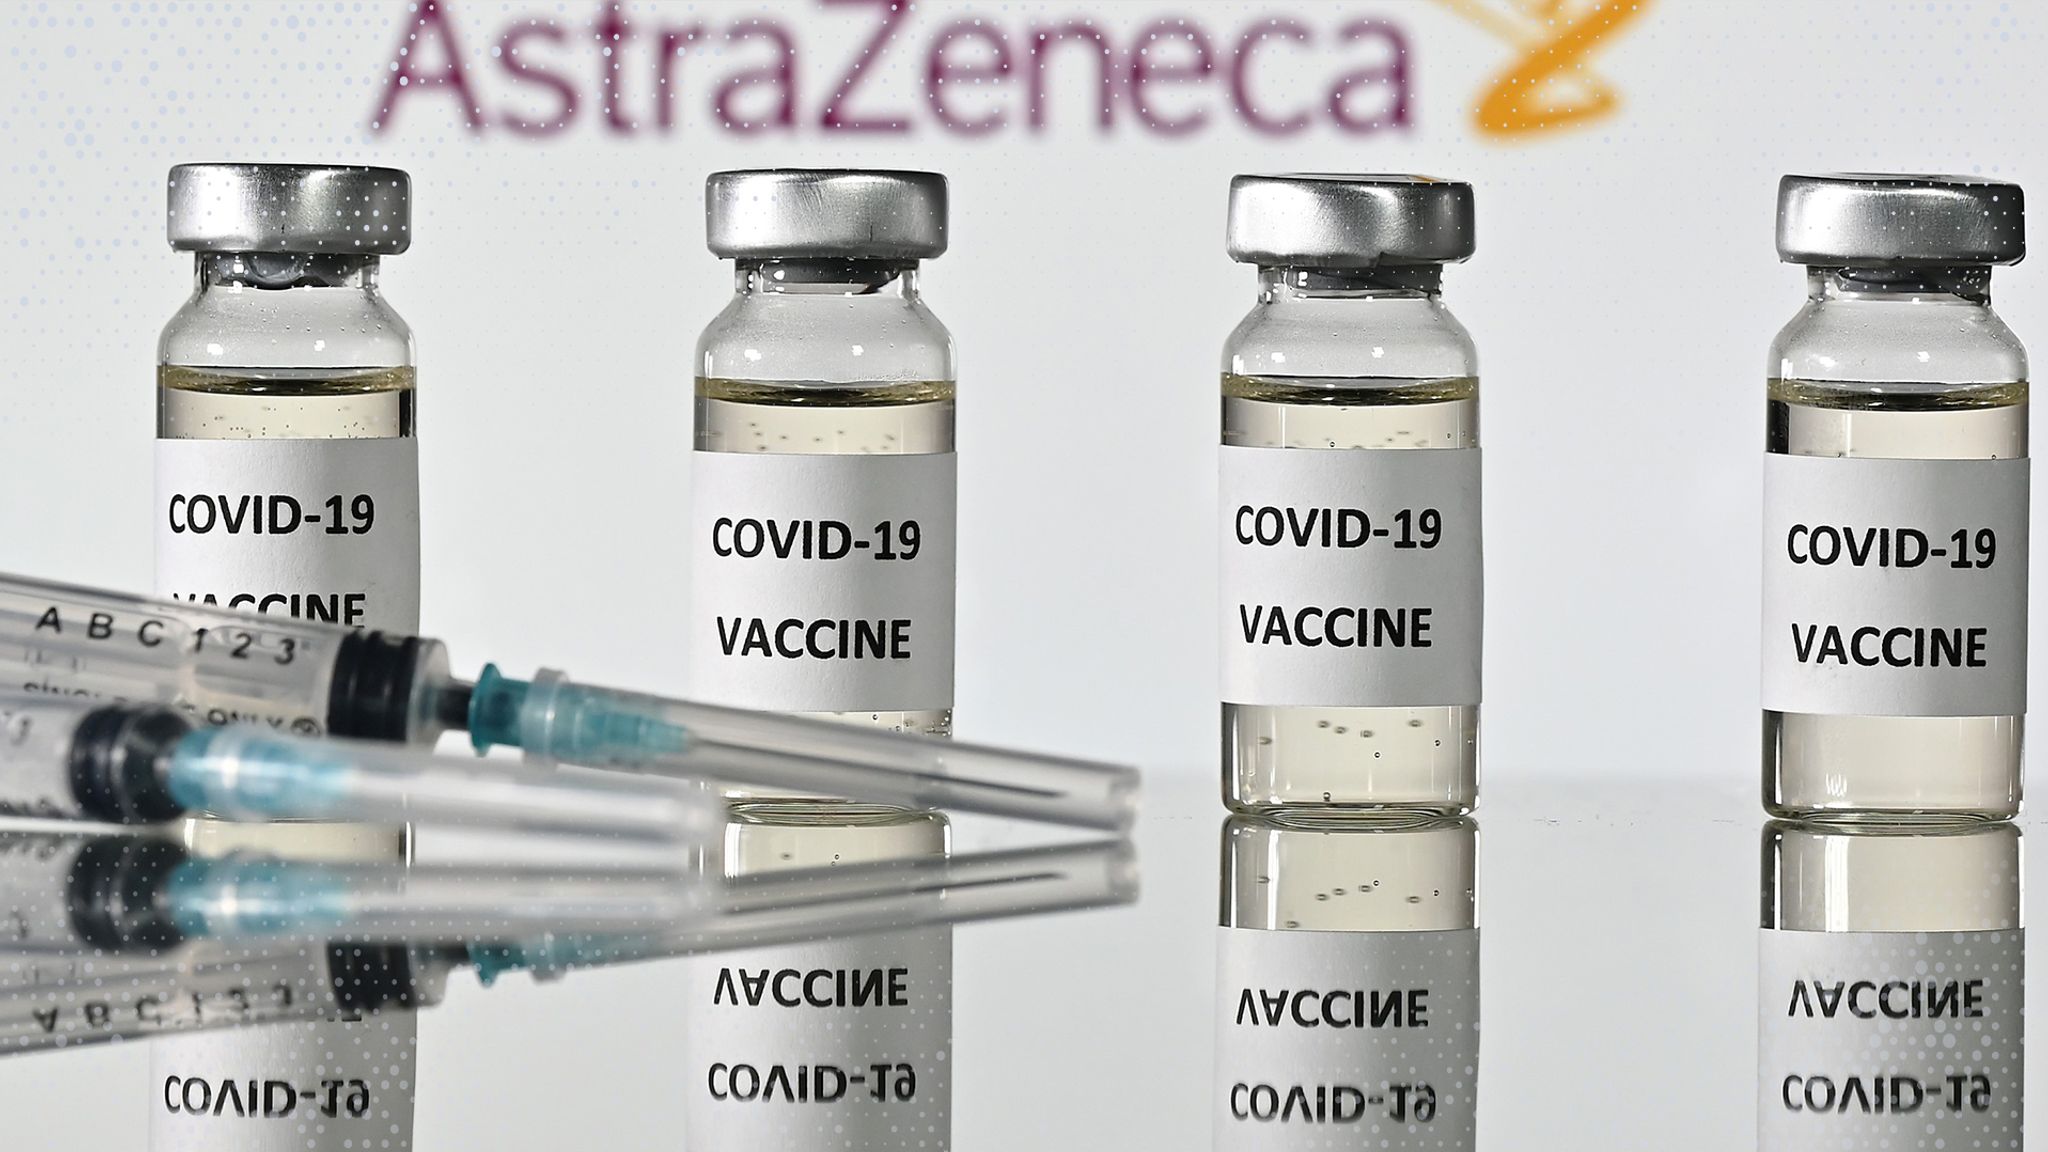 COVID-19: UK regulator to assess Oxford coronavirus vaccine in 'first step' towards roll-out